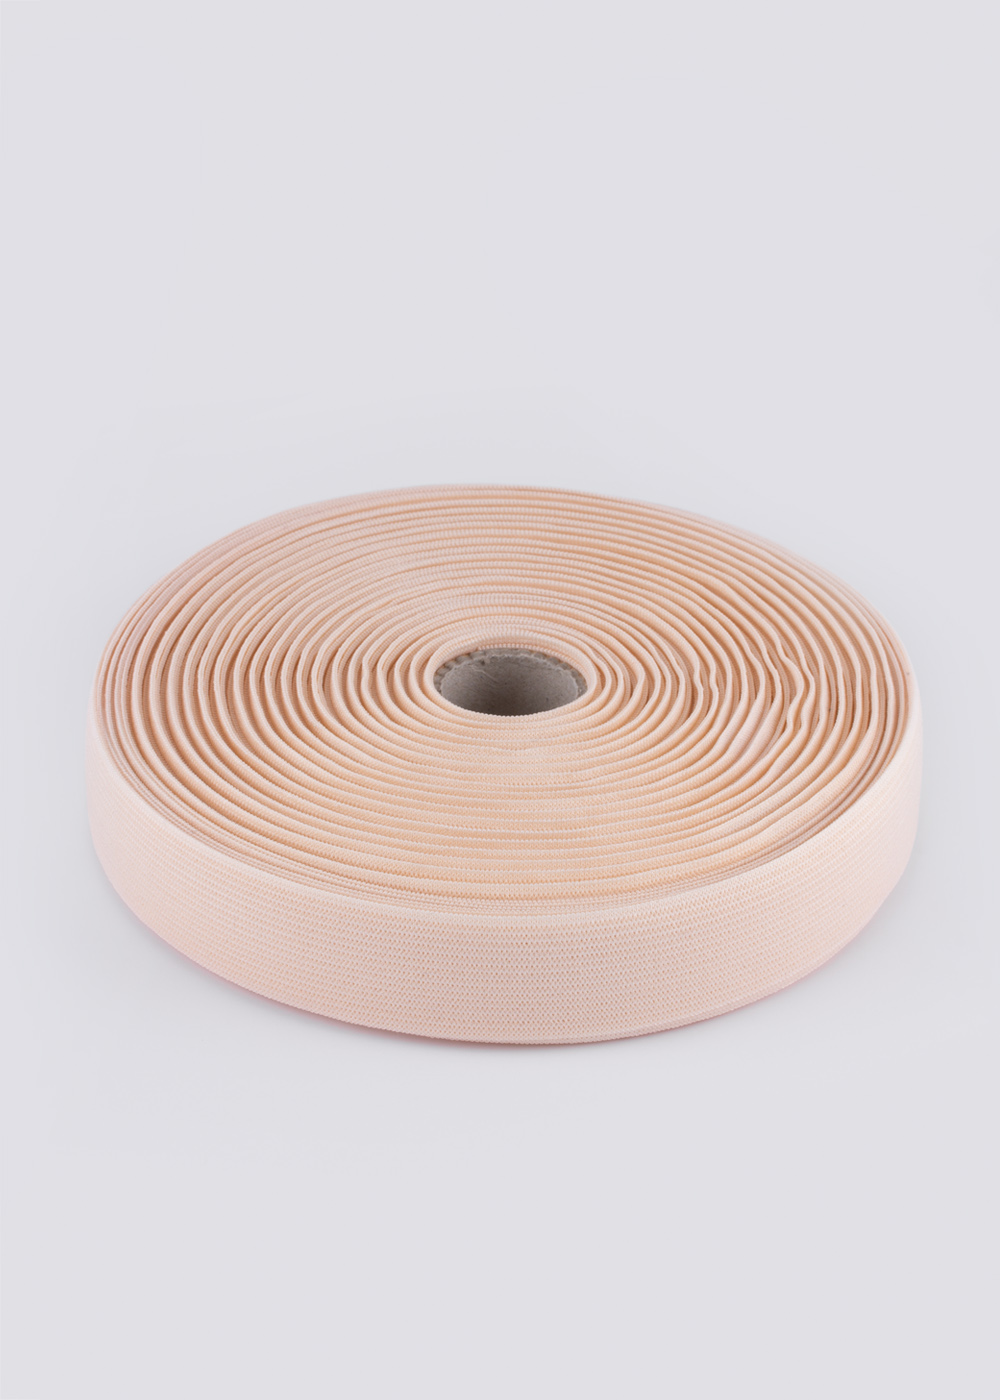 Pointe shoe elastic, 25m in Bolt (0002/4RN)  Nikolay® - official online  shop of pointe shoes and dance apparel in the USA